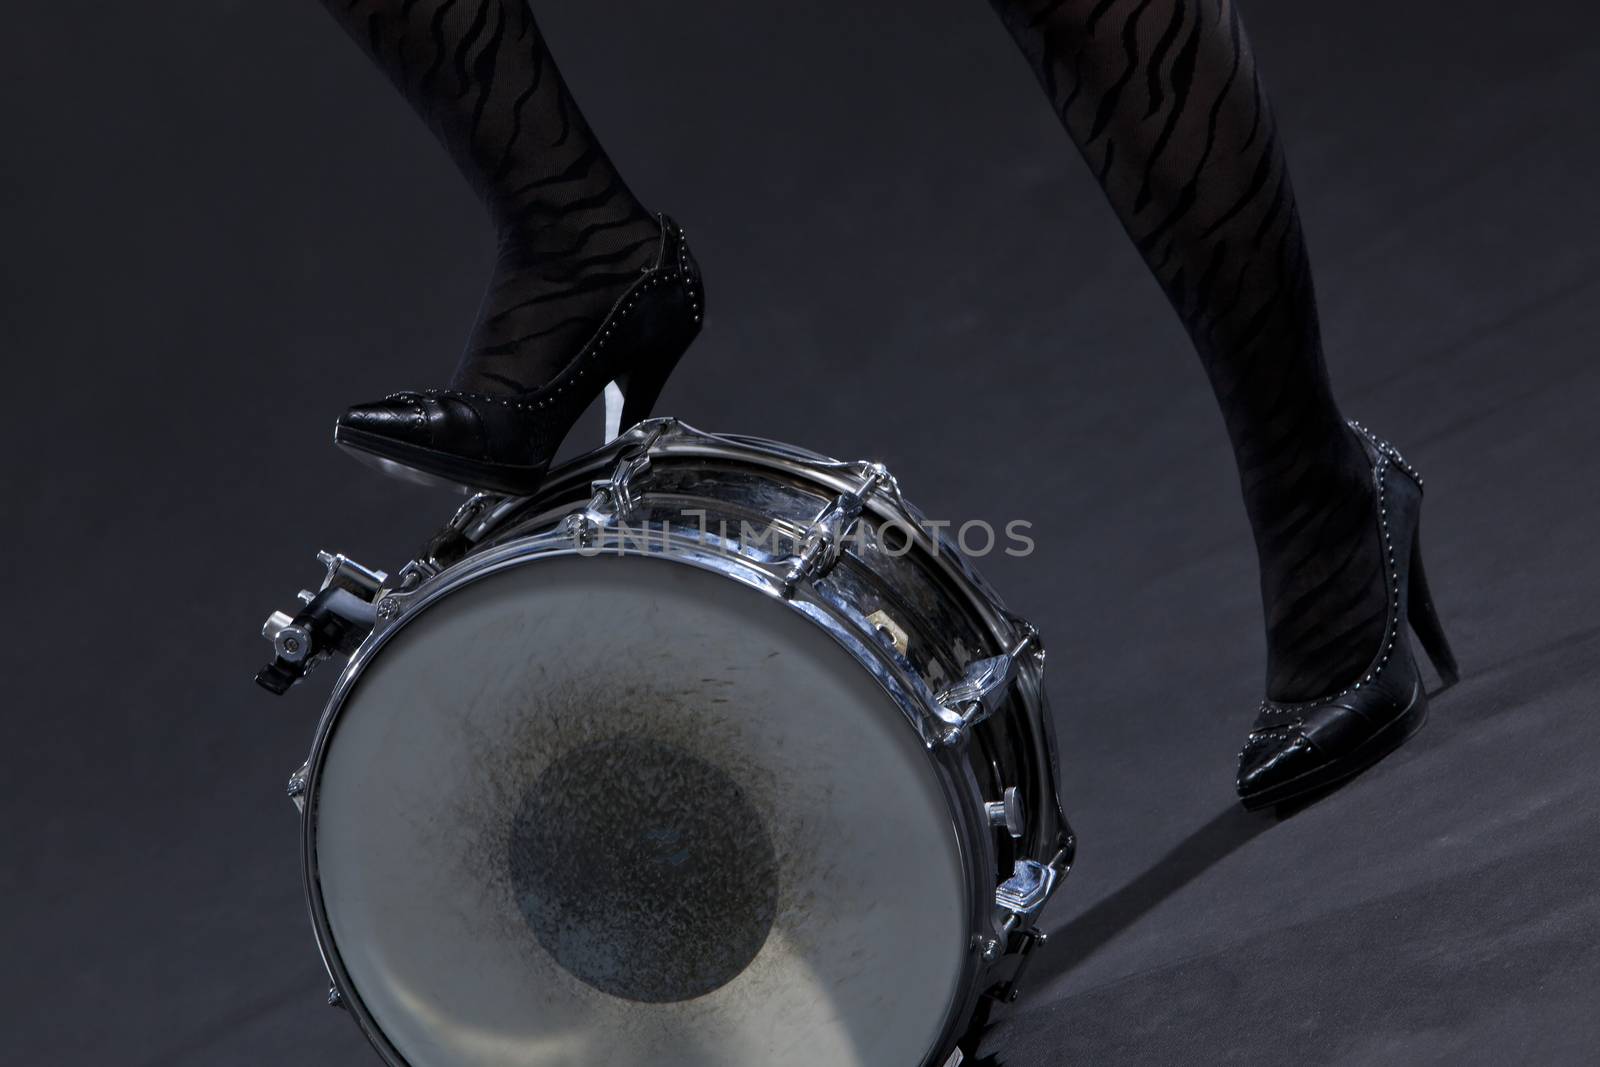 Snare drum and high hells